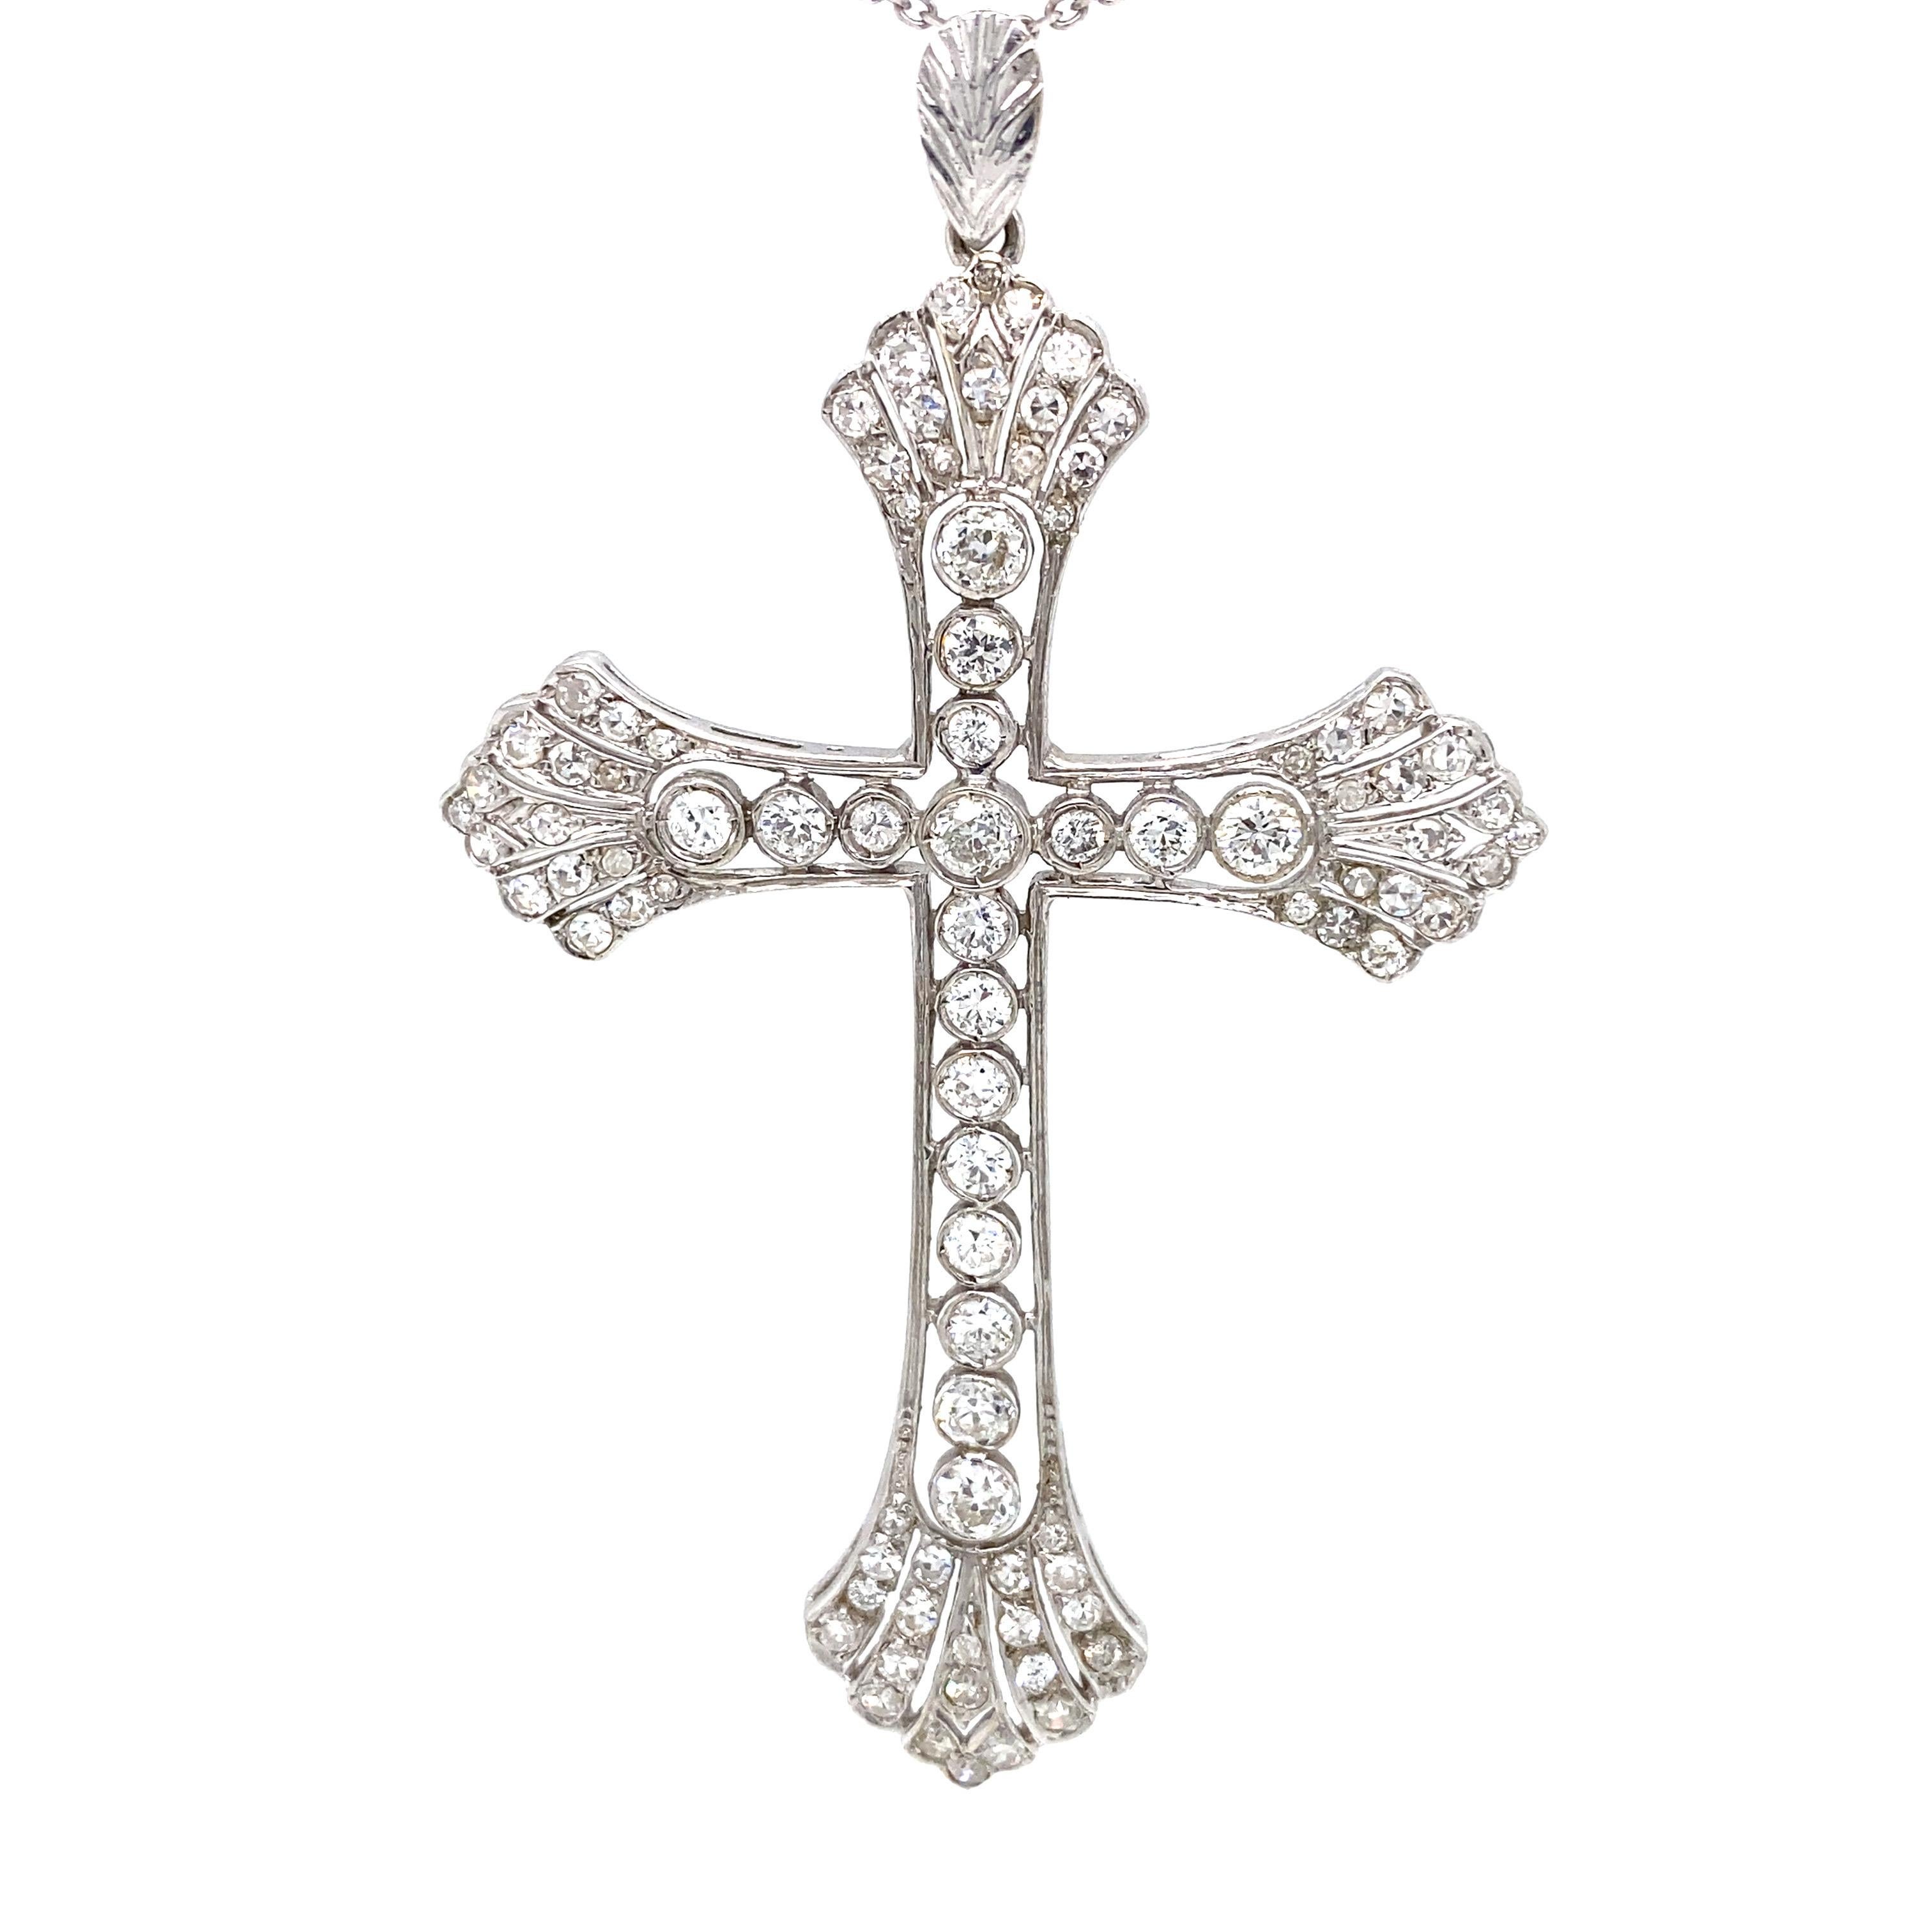 Diamond Art Deco Cross Pendant in 14K White Gold.  (86) Round Brilliant Cut Diamonds weighing 2.53 carat total weight, G-I in color and VS-SI in clarity are expertly set. The Pendant measures 2 7/8 inch in length and 1 3/4 inch in width. 7.15 grams.